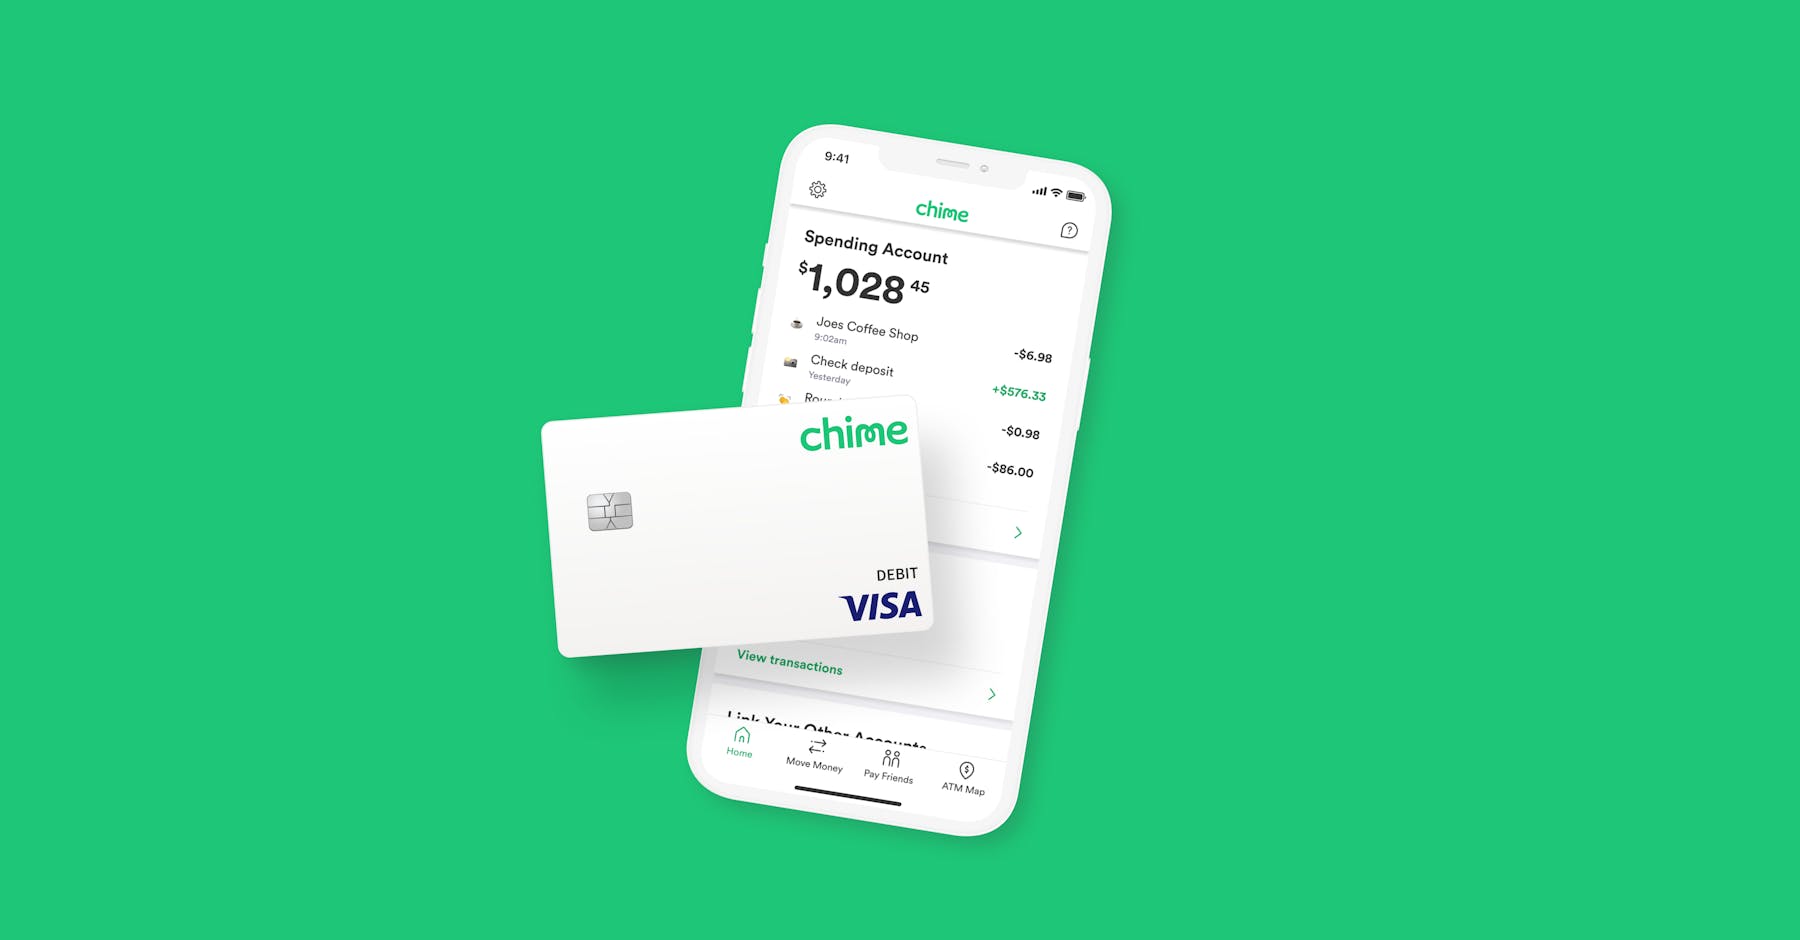 Can You Send Money From Chime to PayPal?